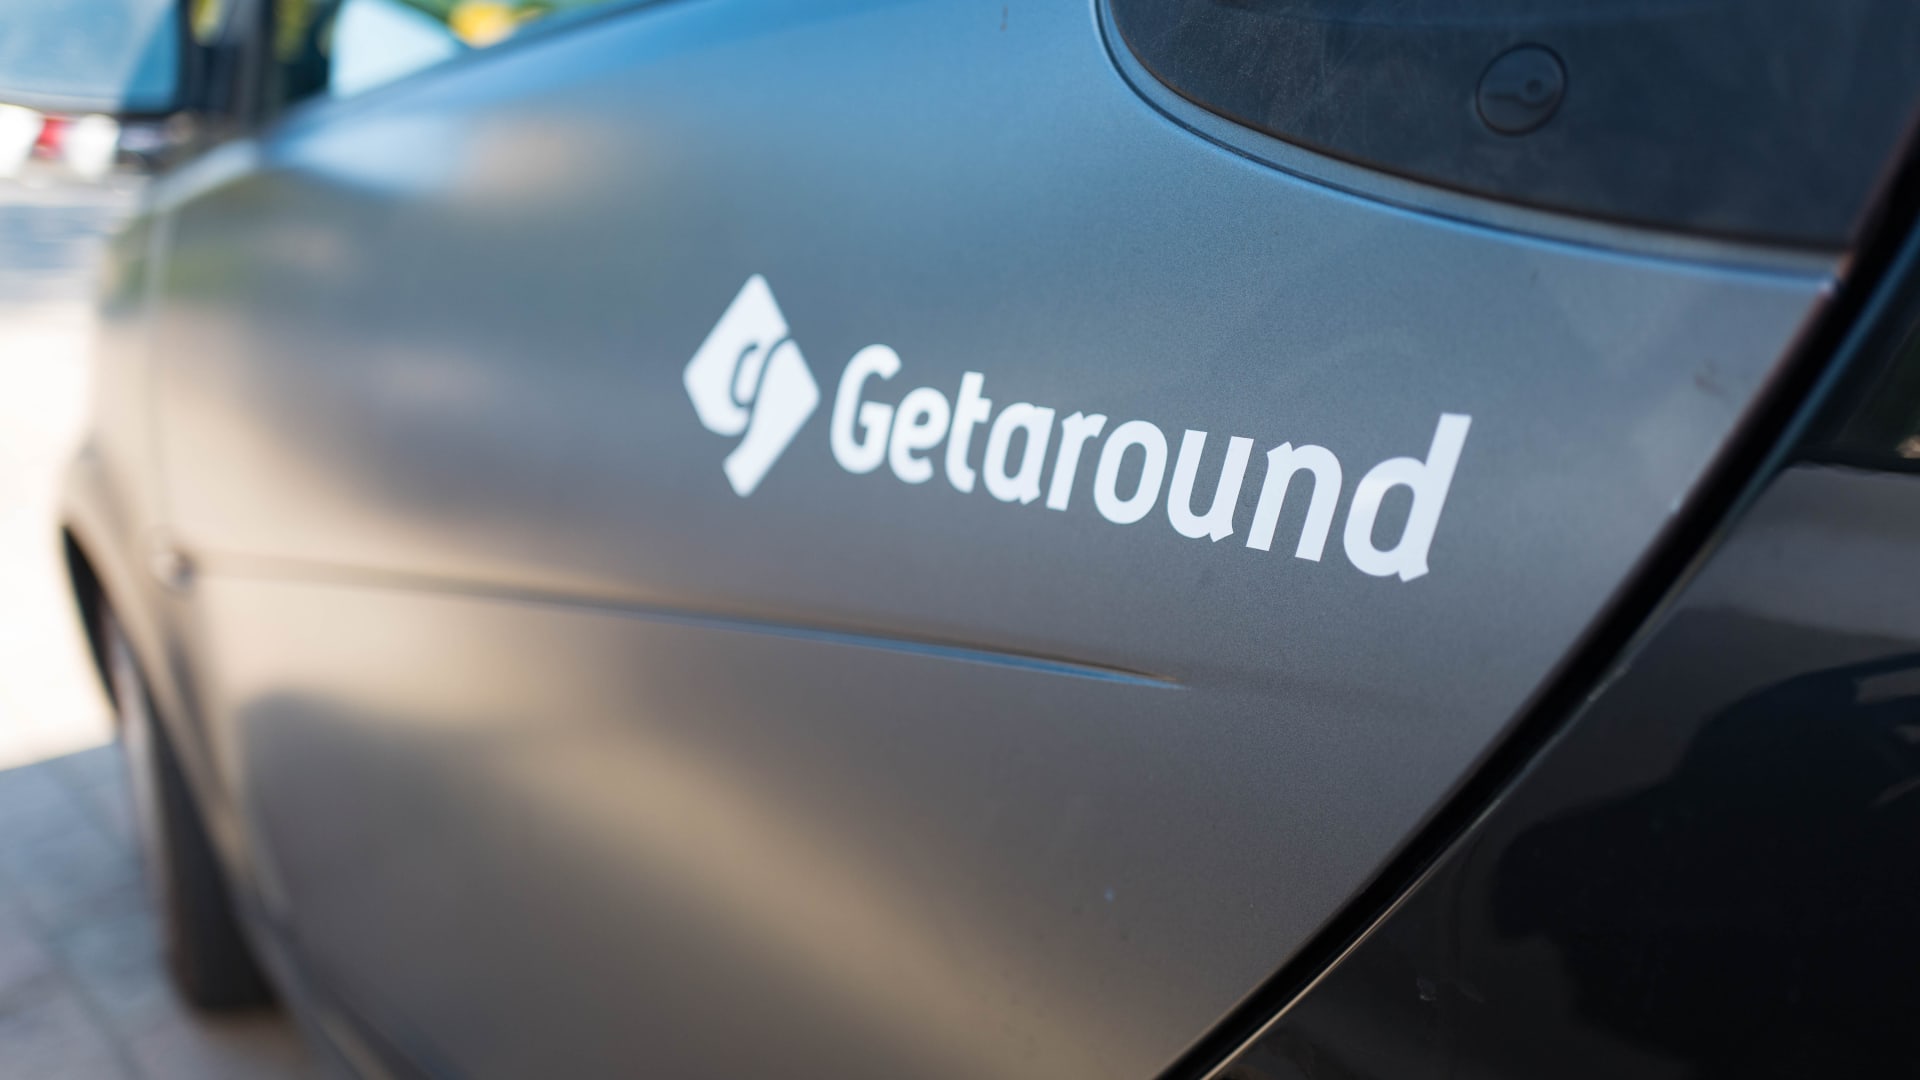 Logo for Getaround peer-to-peer car sharing service on the side of a car in the Silicon Valley town of Mountain View, California, August 24, 2016.